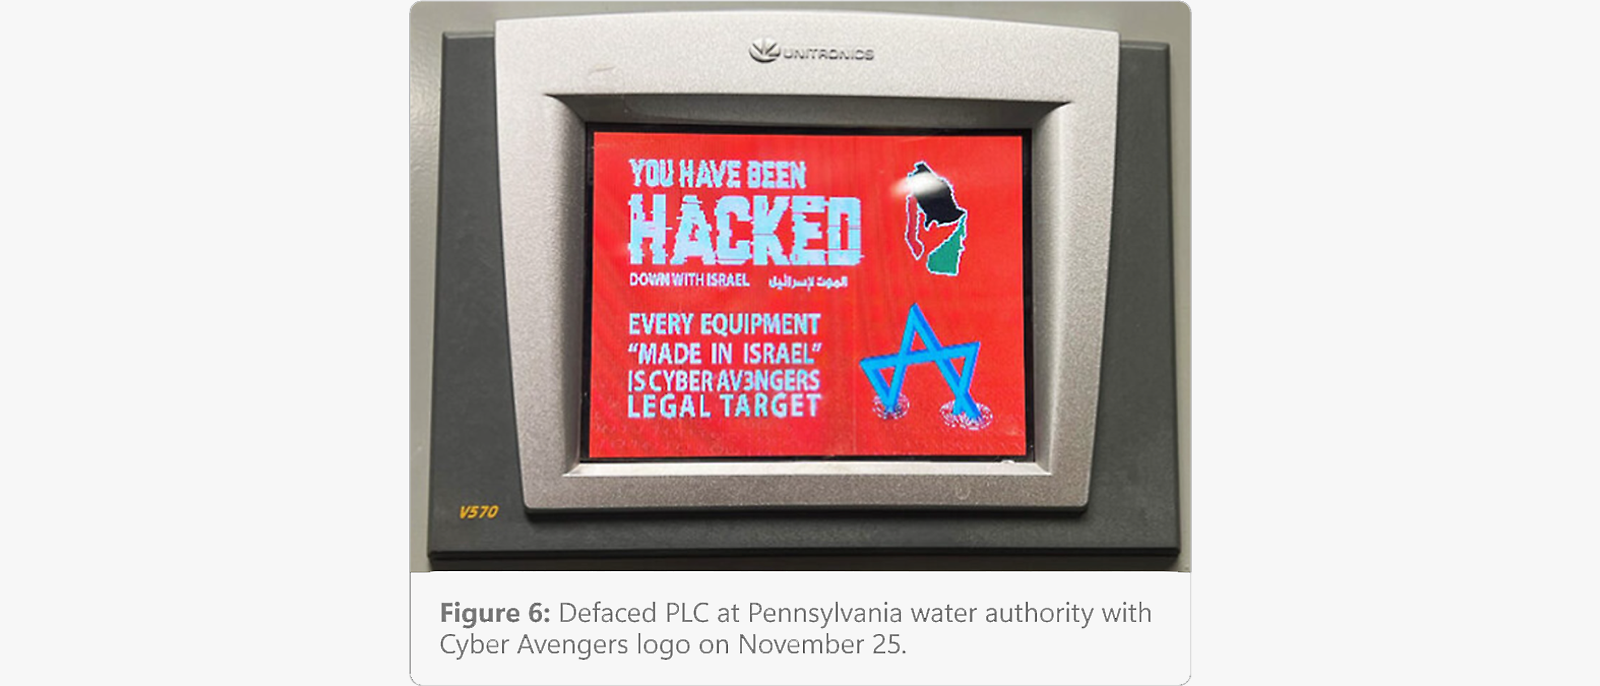 Defaced PLC at Pennsylvania water authority with Cyber Avengers logo, November 25